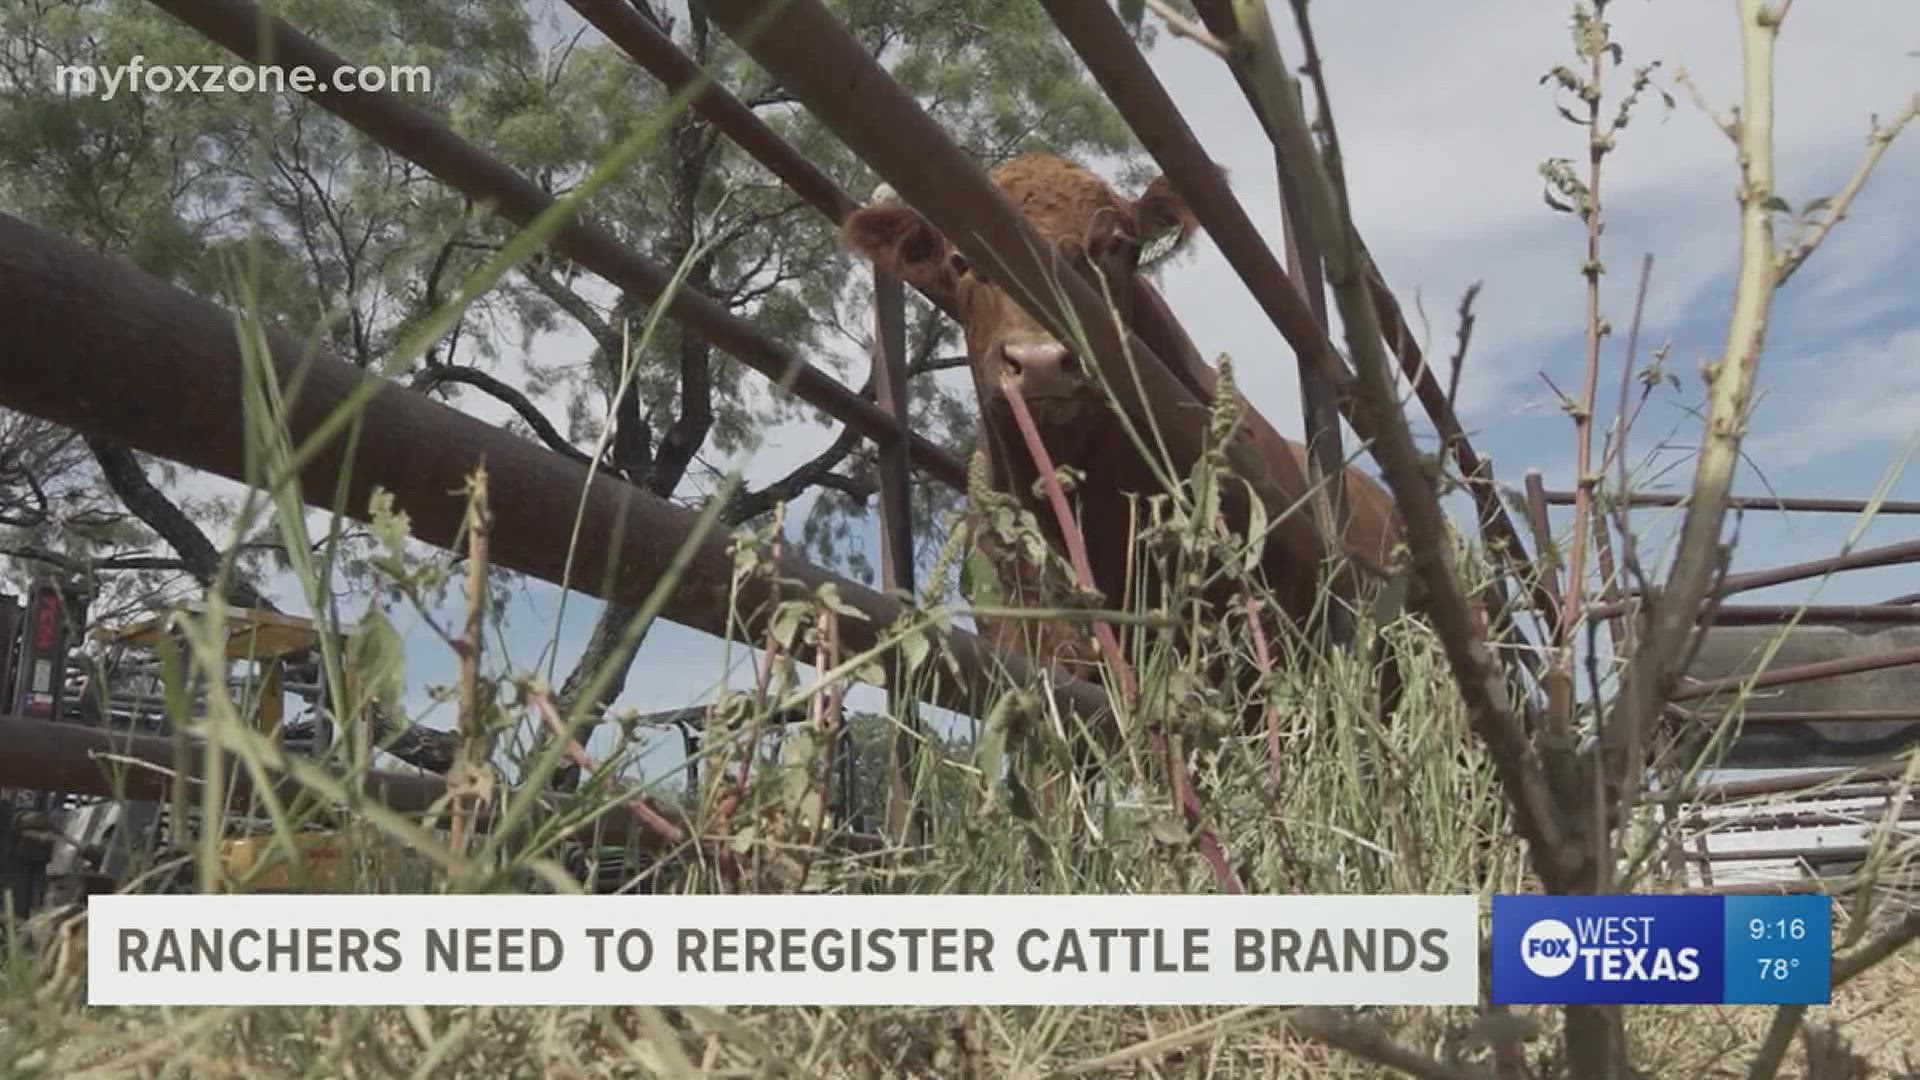 140,000 Texas cattle brands are due for reregistering.